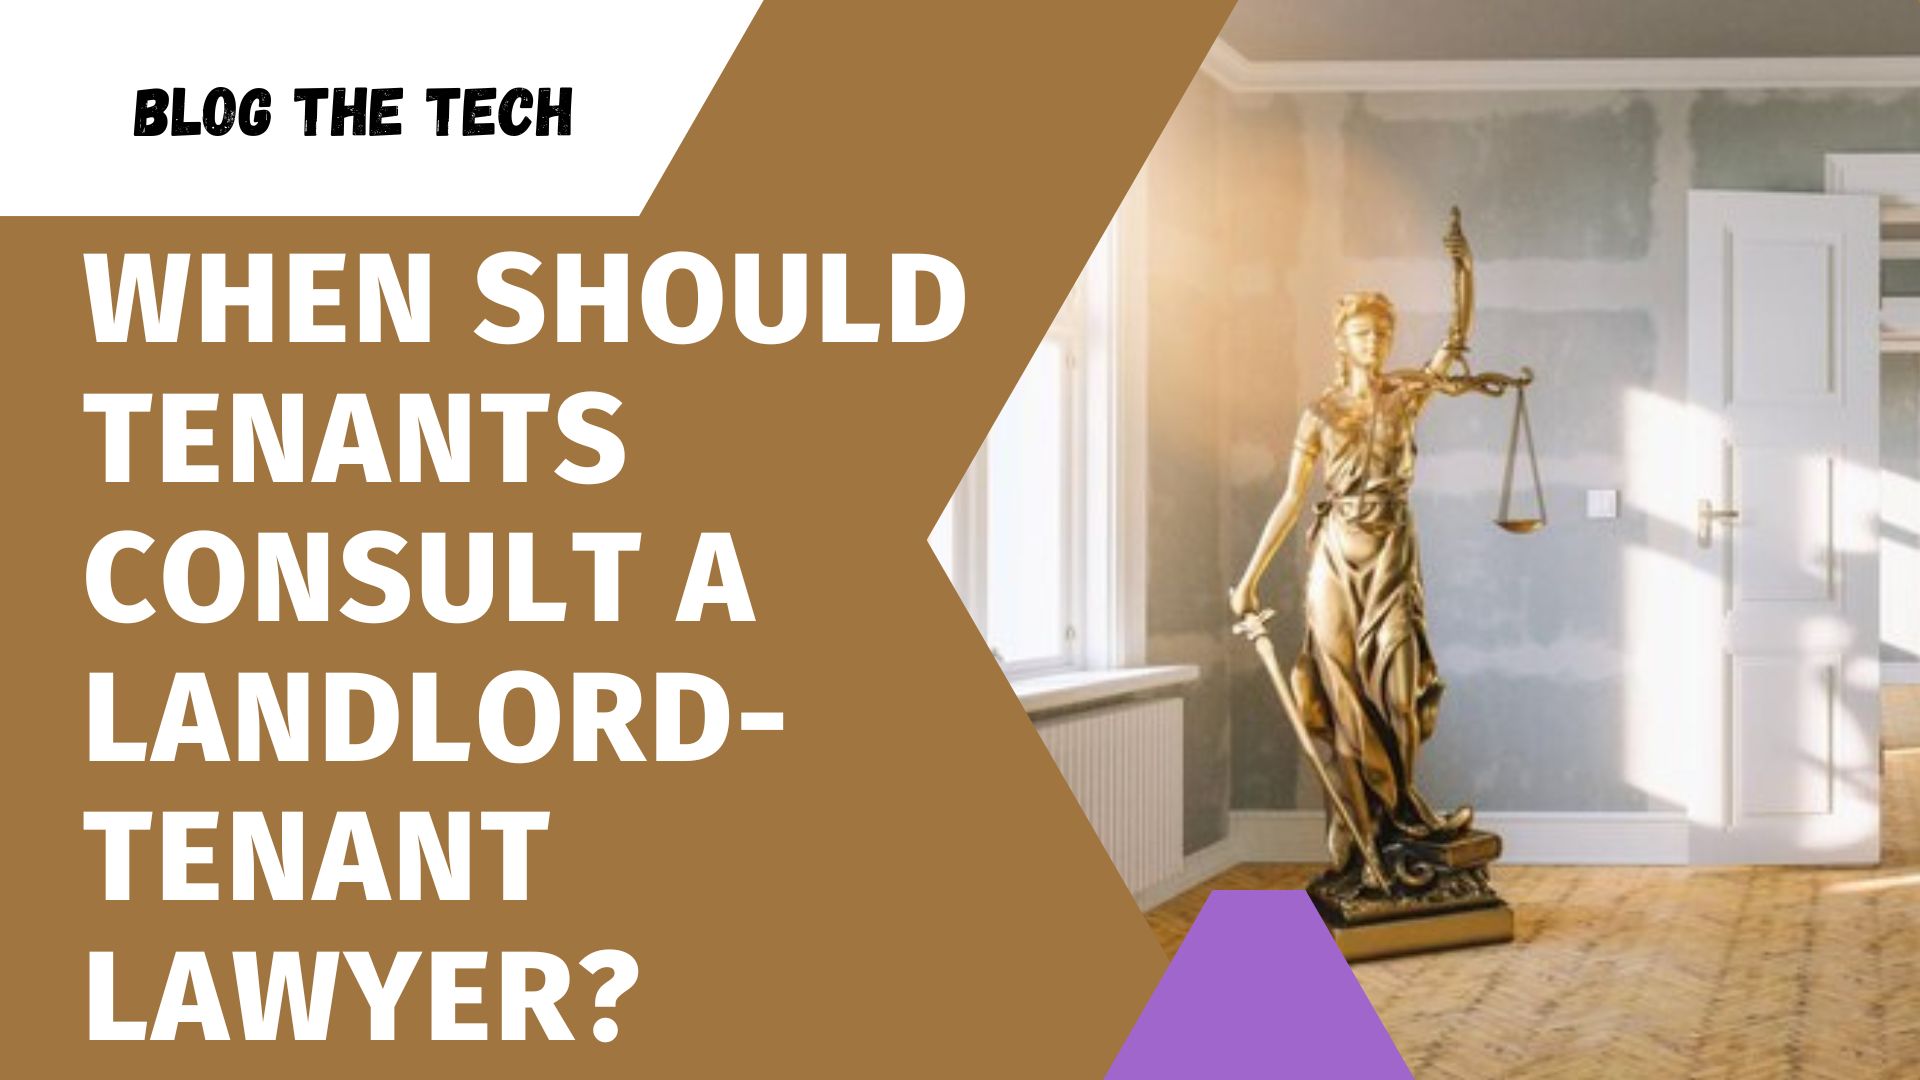 When Should Tenants Consult a Landlord-Tenant Lawyer?